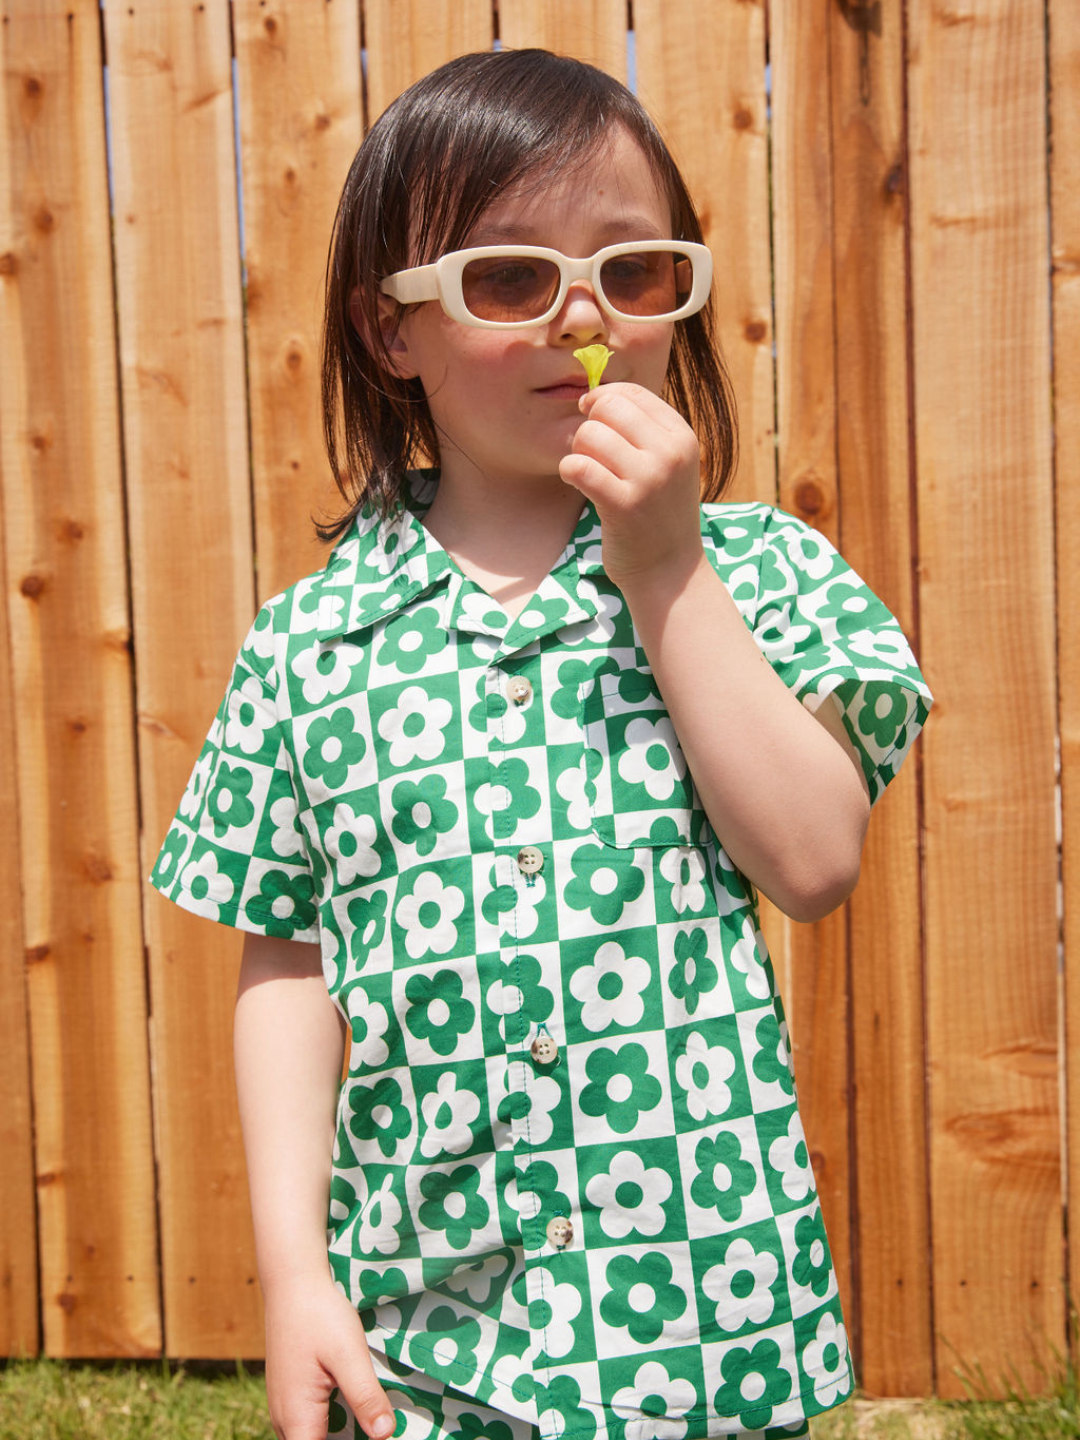 Child in sunglasses showing the shirt of a kids' short set in a checkerboard pattern of green and white flowers